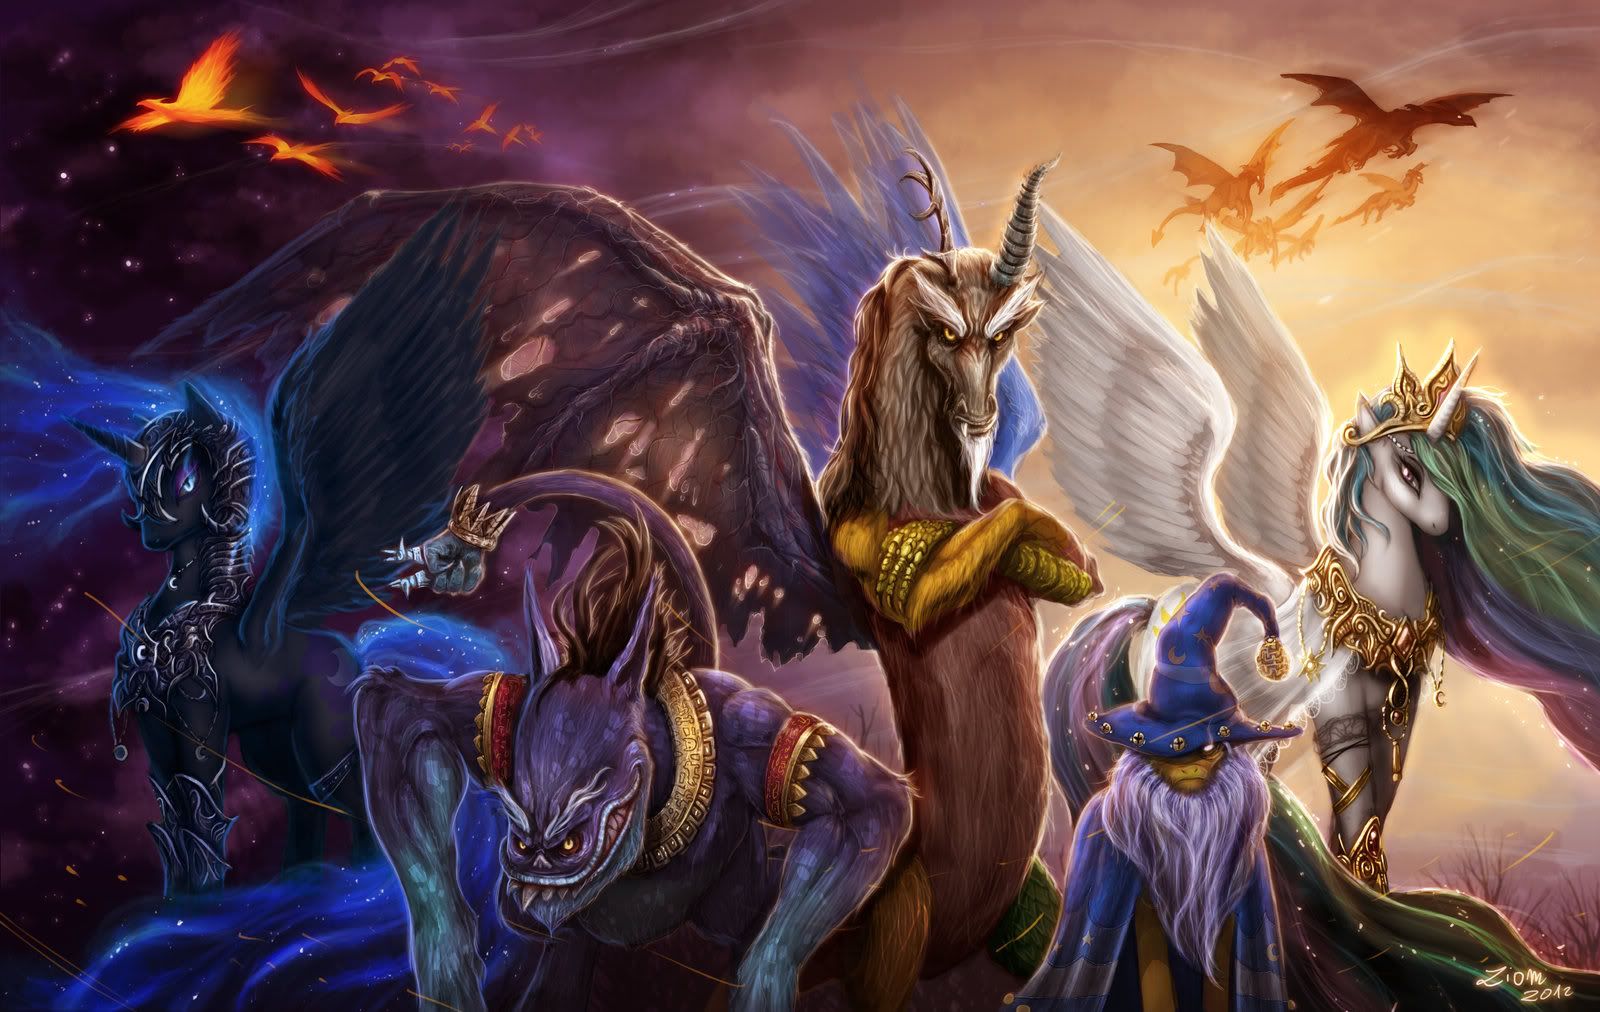 legends_of_the_equestria_by_ziom05-d4w9abd.jpg